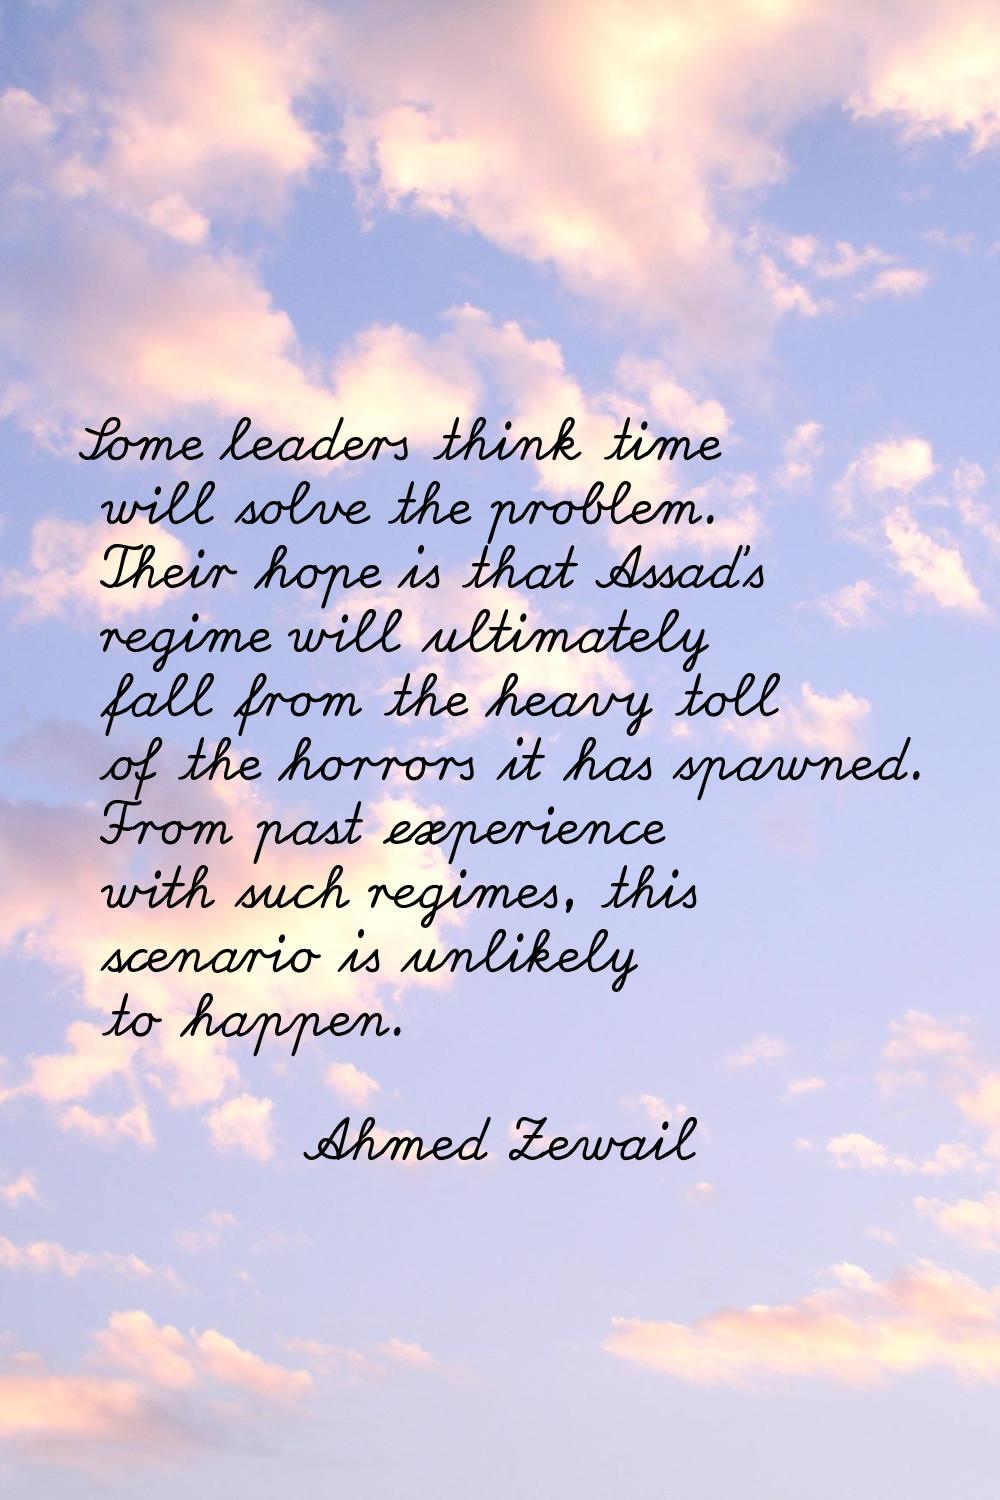 Some leaders think time will solve the problem. Their hope is that Assad's regime will ultimately f